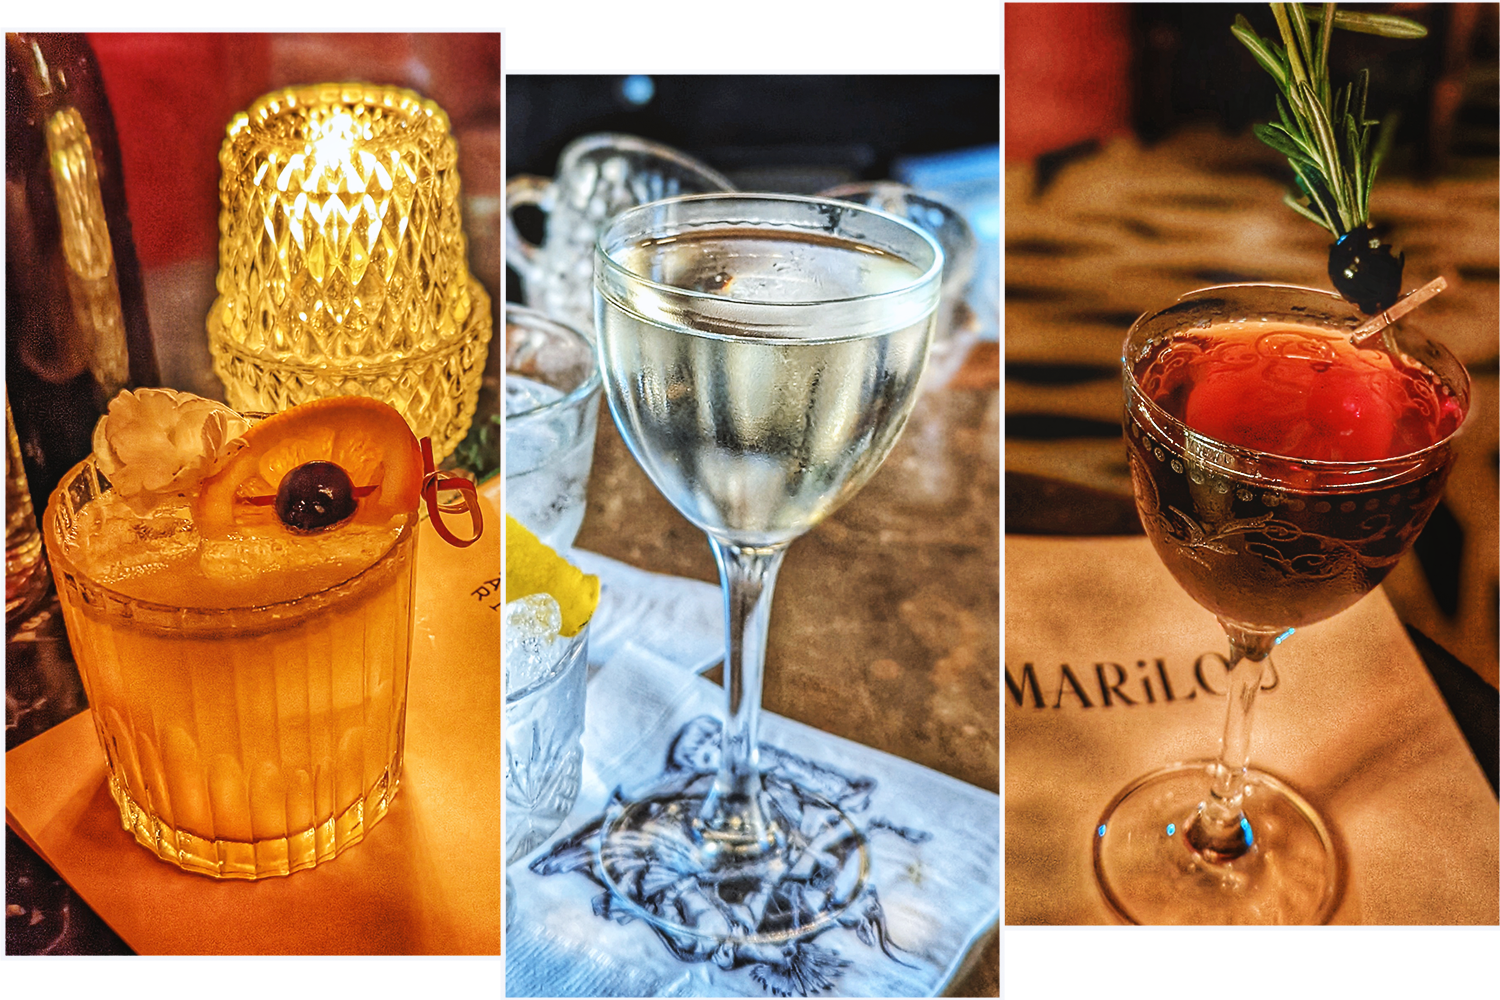 Cocktails in New Orleans: A Tokyo Record at Bar Marilou, Tuxedo Tails at Jewel of the South and Le Canard at Marilou.